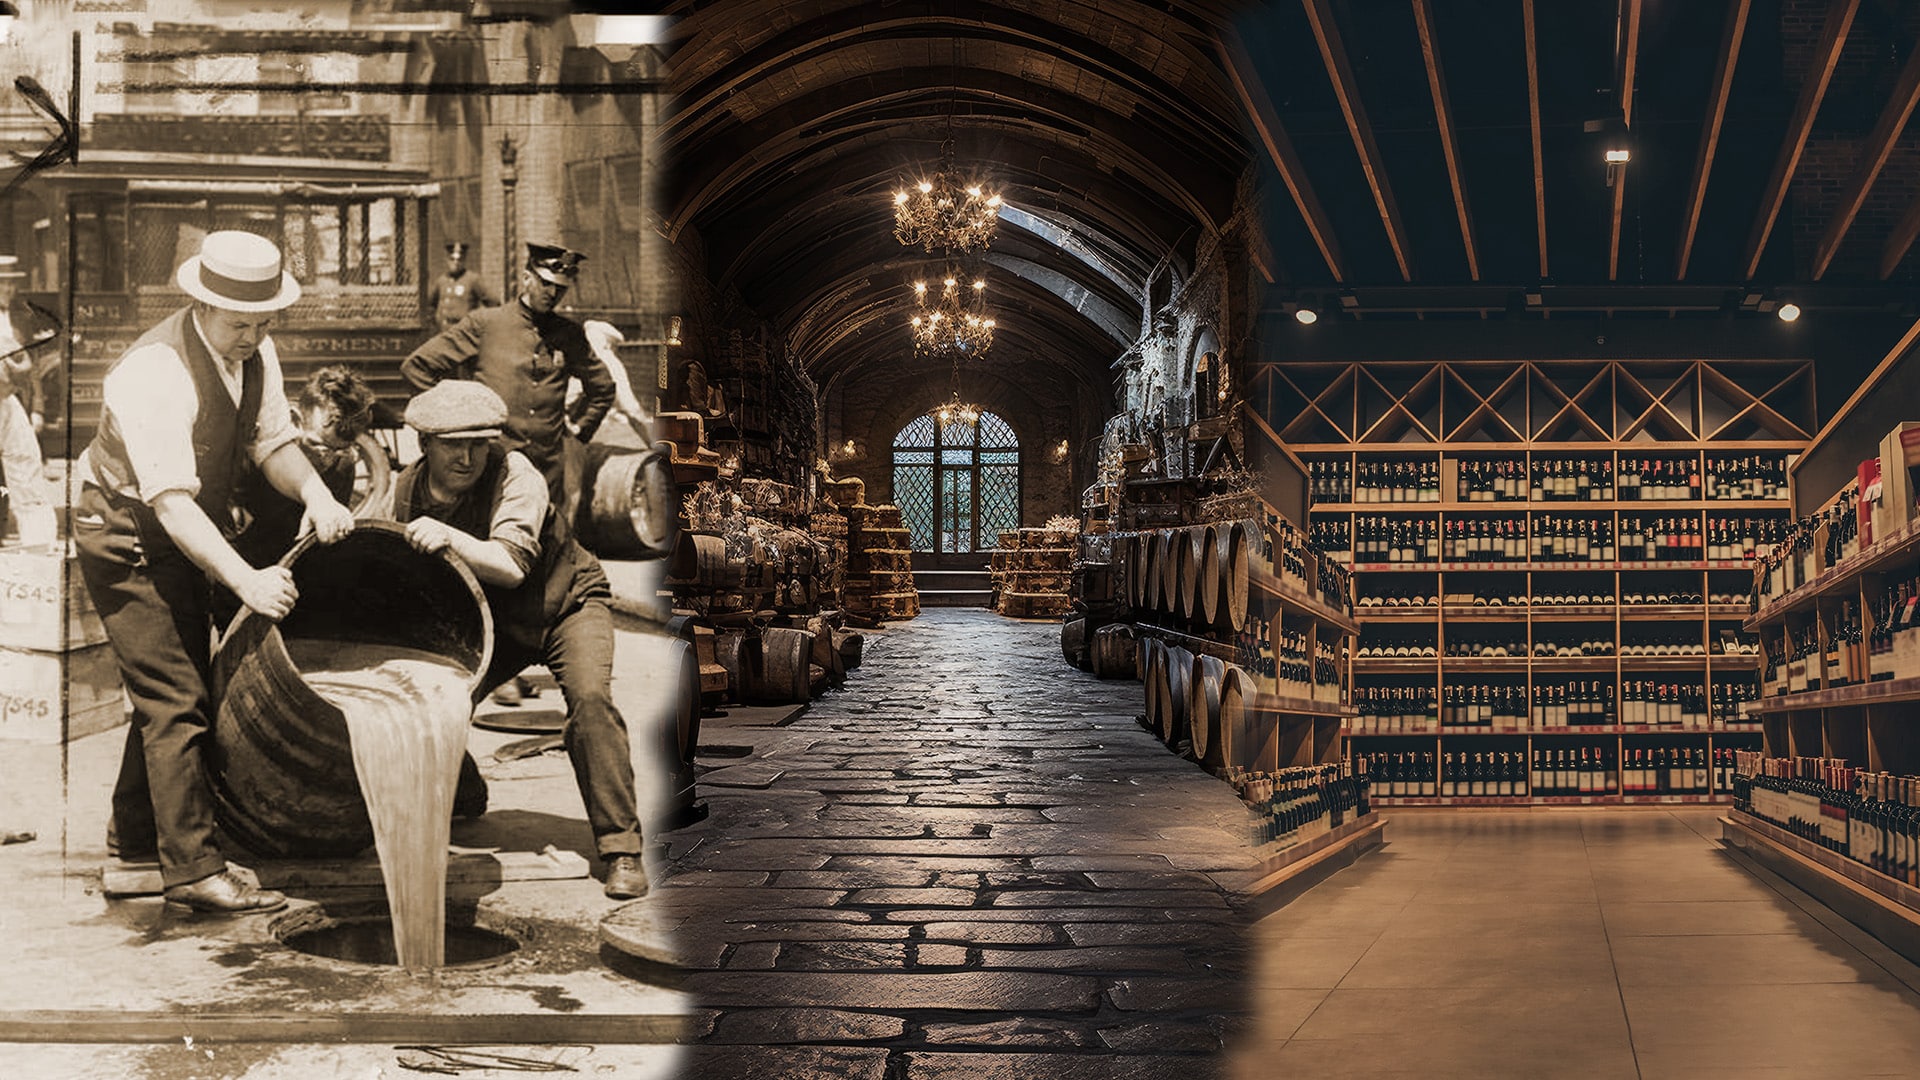 A collage of three different images spanning from prohibition to present day